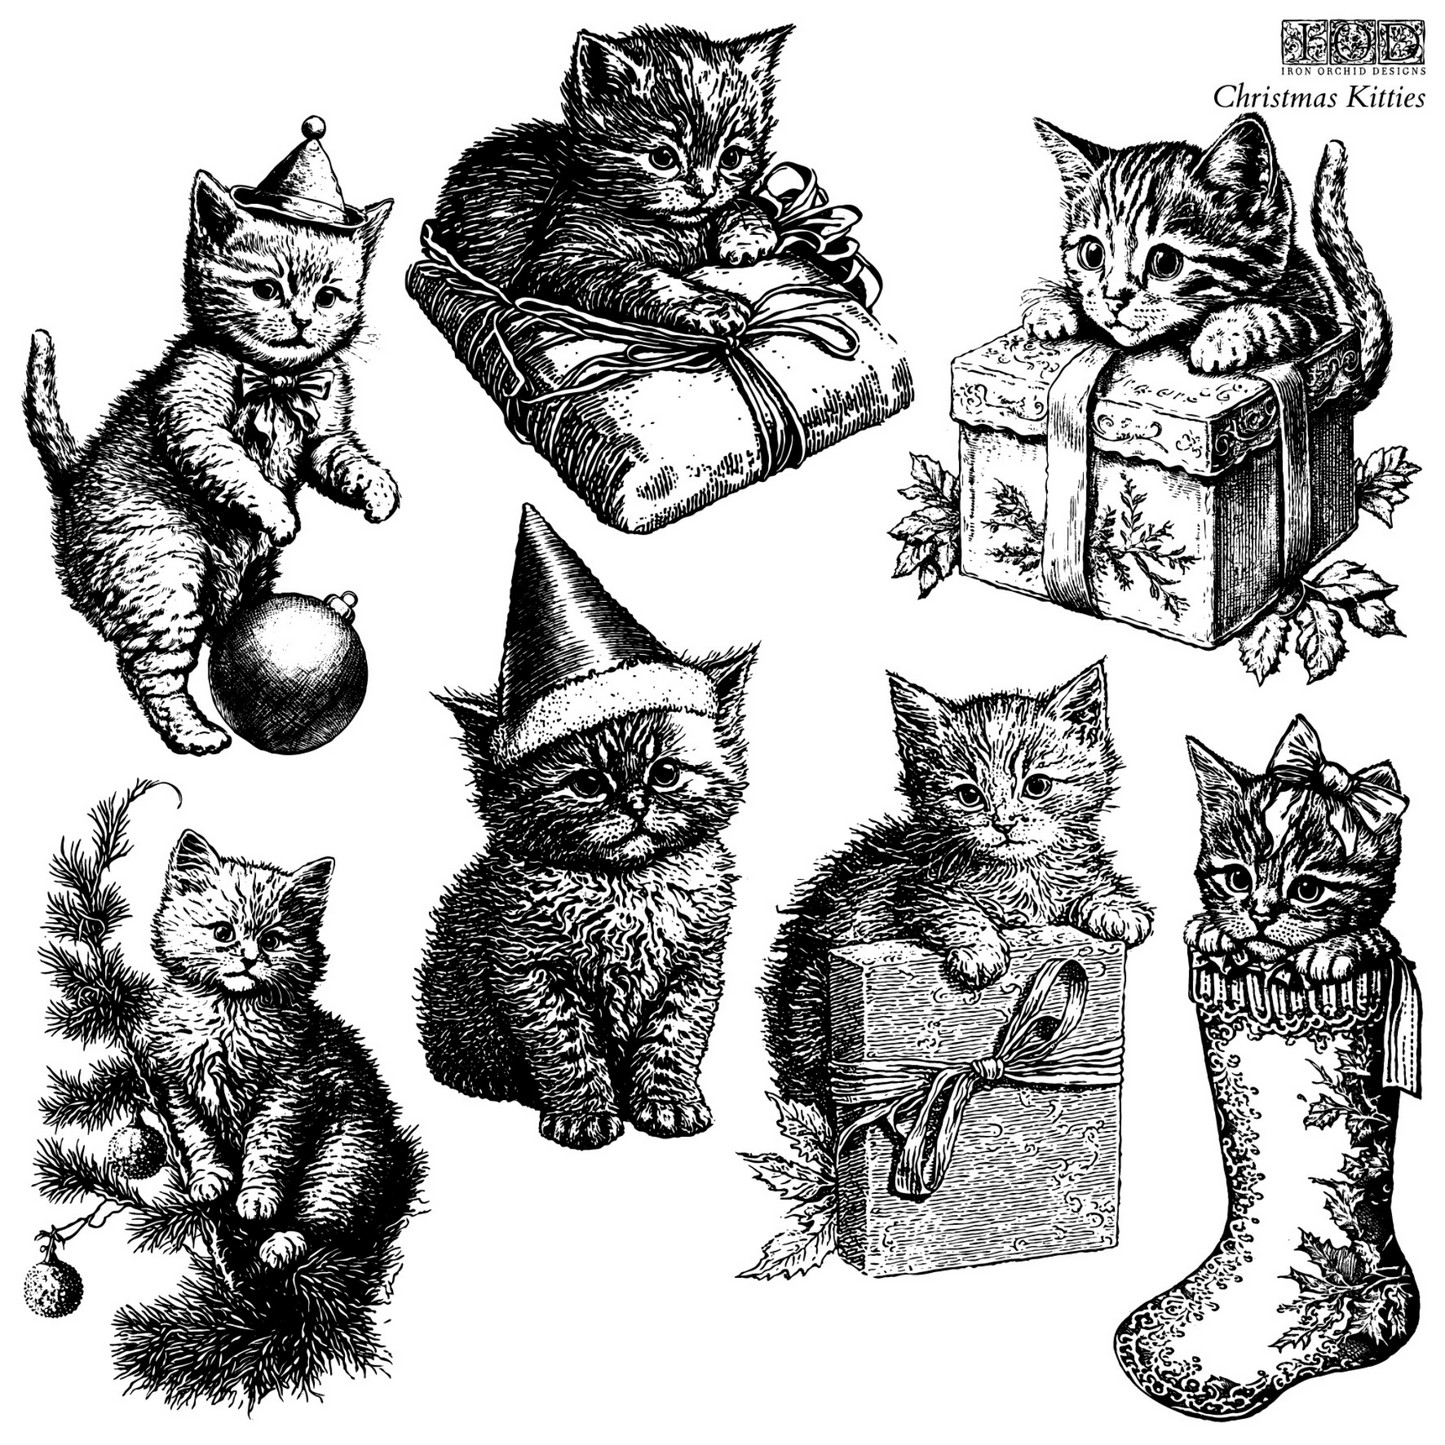 "Christmas Kitties" IOD Stamp by Iron Orchid Designs. Available at Milton's Daughter.